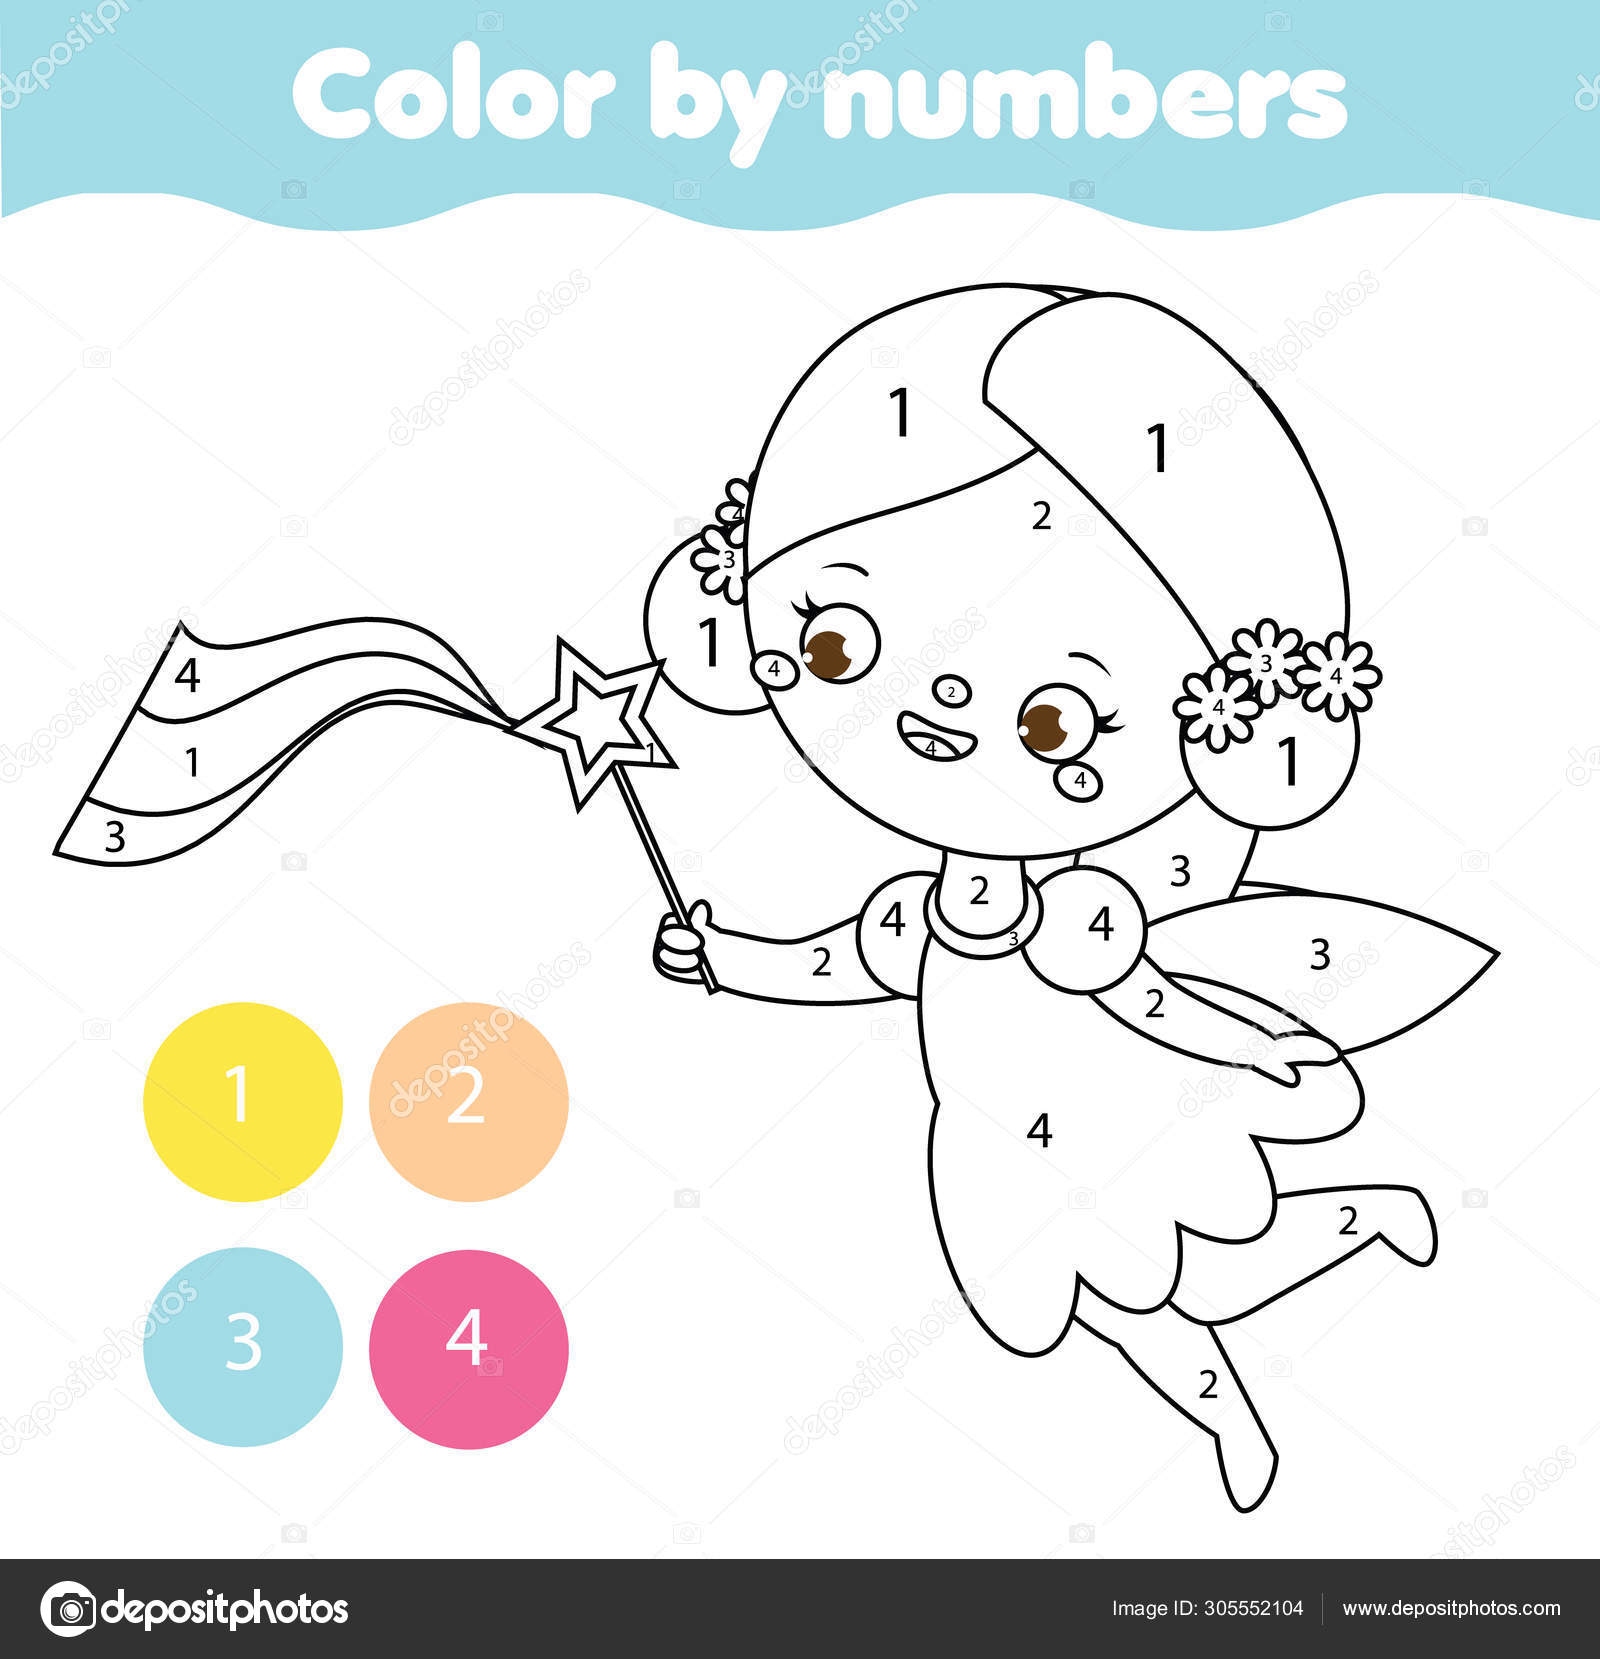 Cute fairy with magic wand coloring page for kids educational children game color by numbers activity stock vector by ksuklein